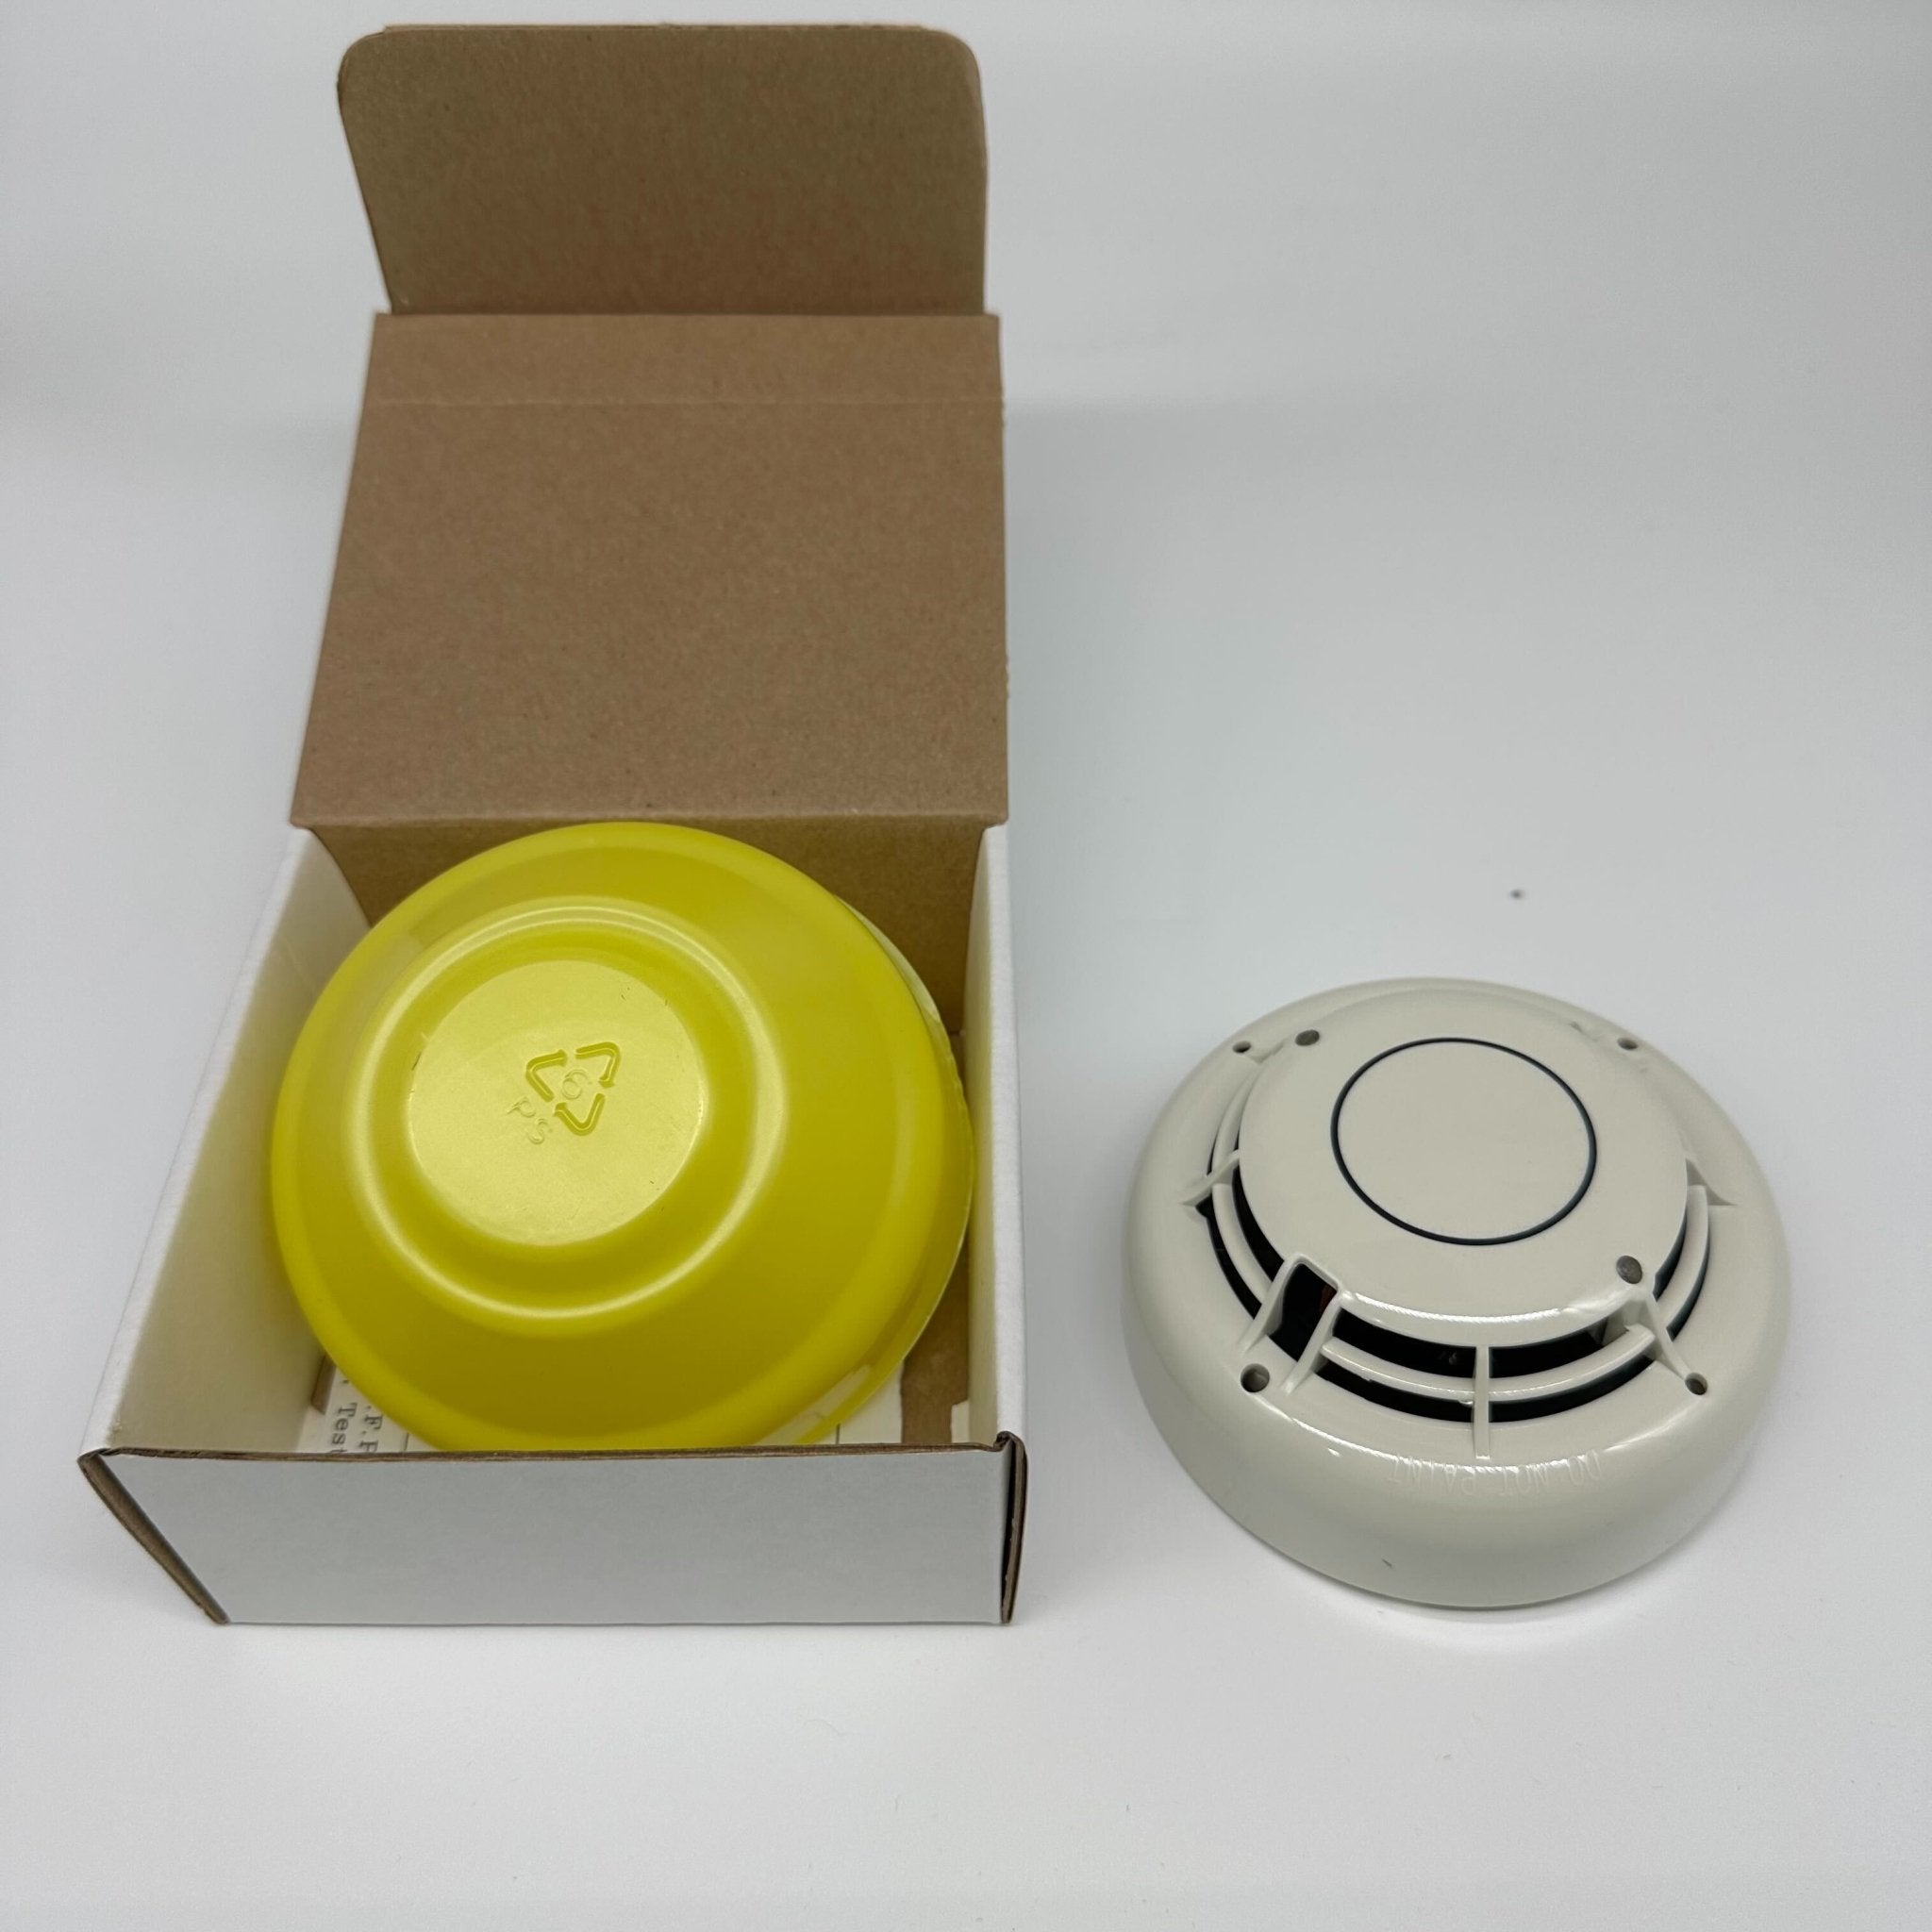 Silent Knight SD505-PHOTO - The Fire Alarm Supplier